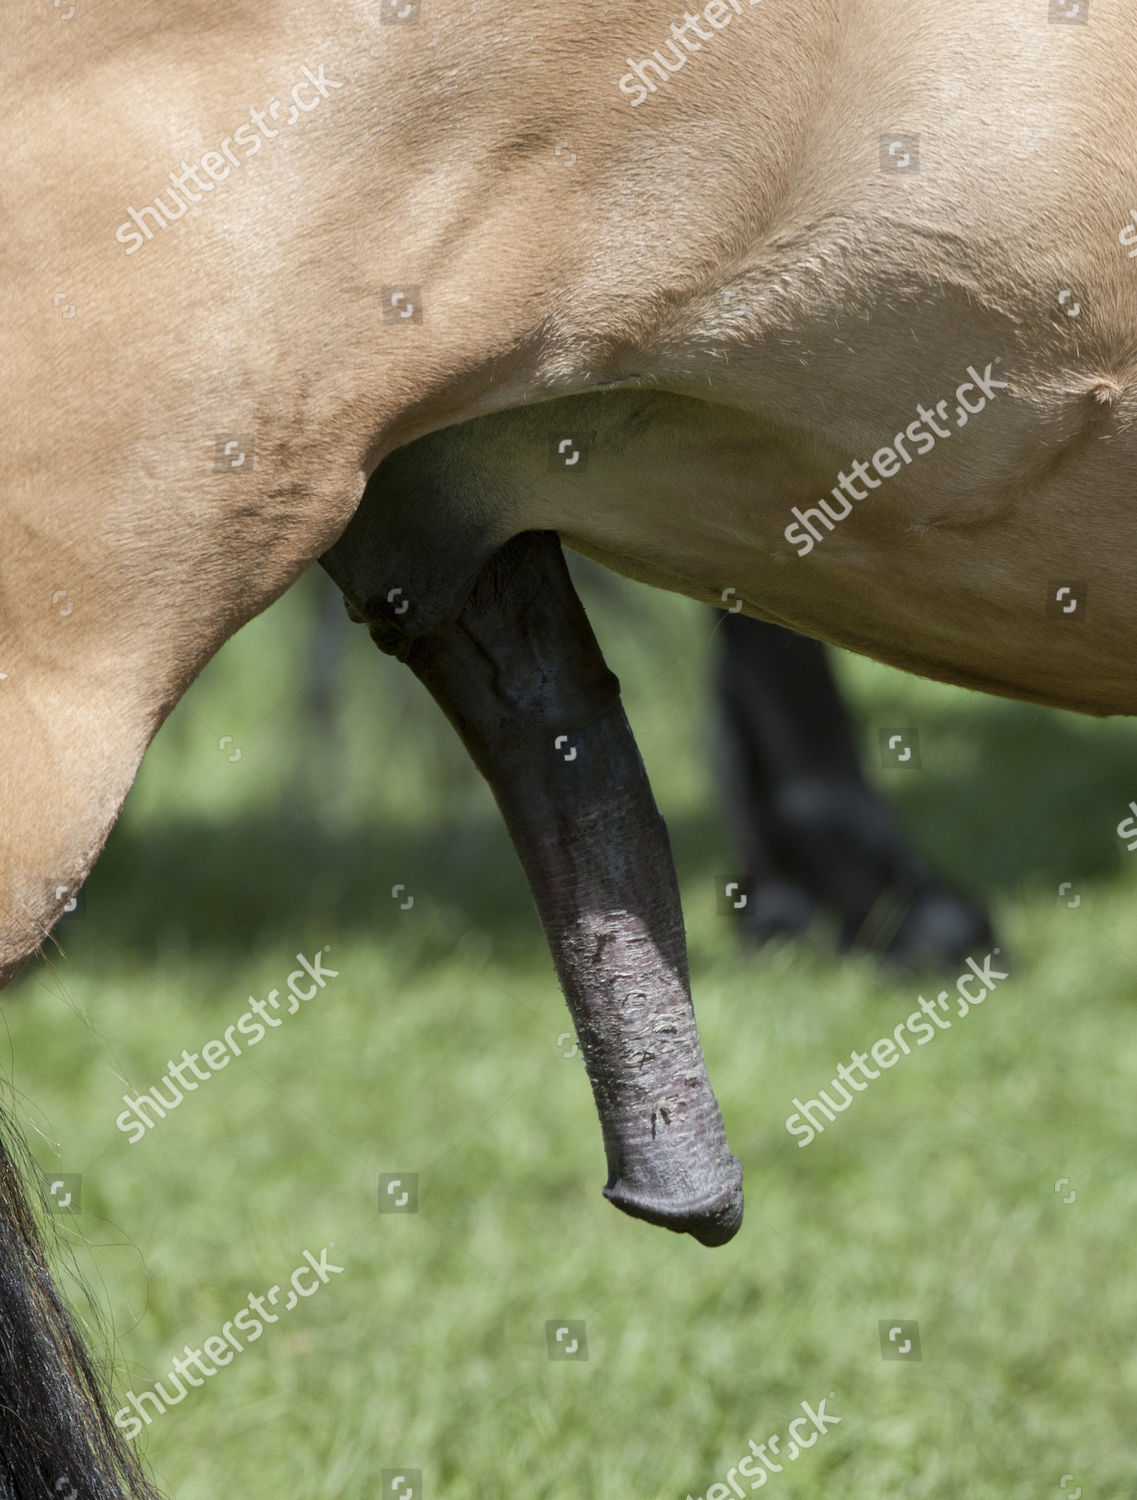 21 Horse Penis Stock Photos, Images & Pictures